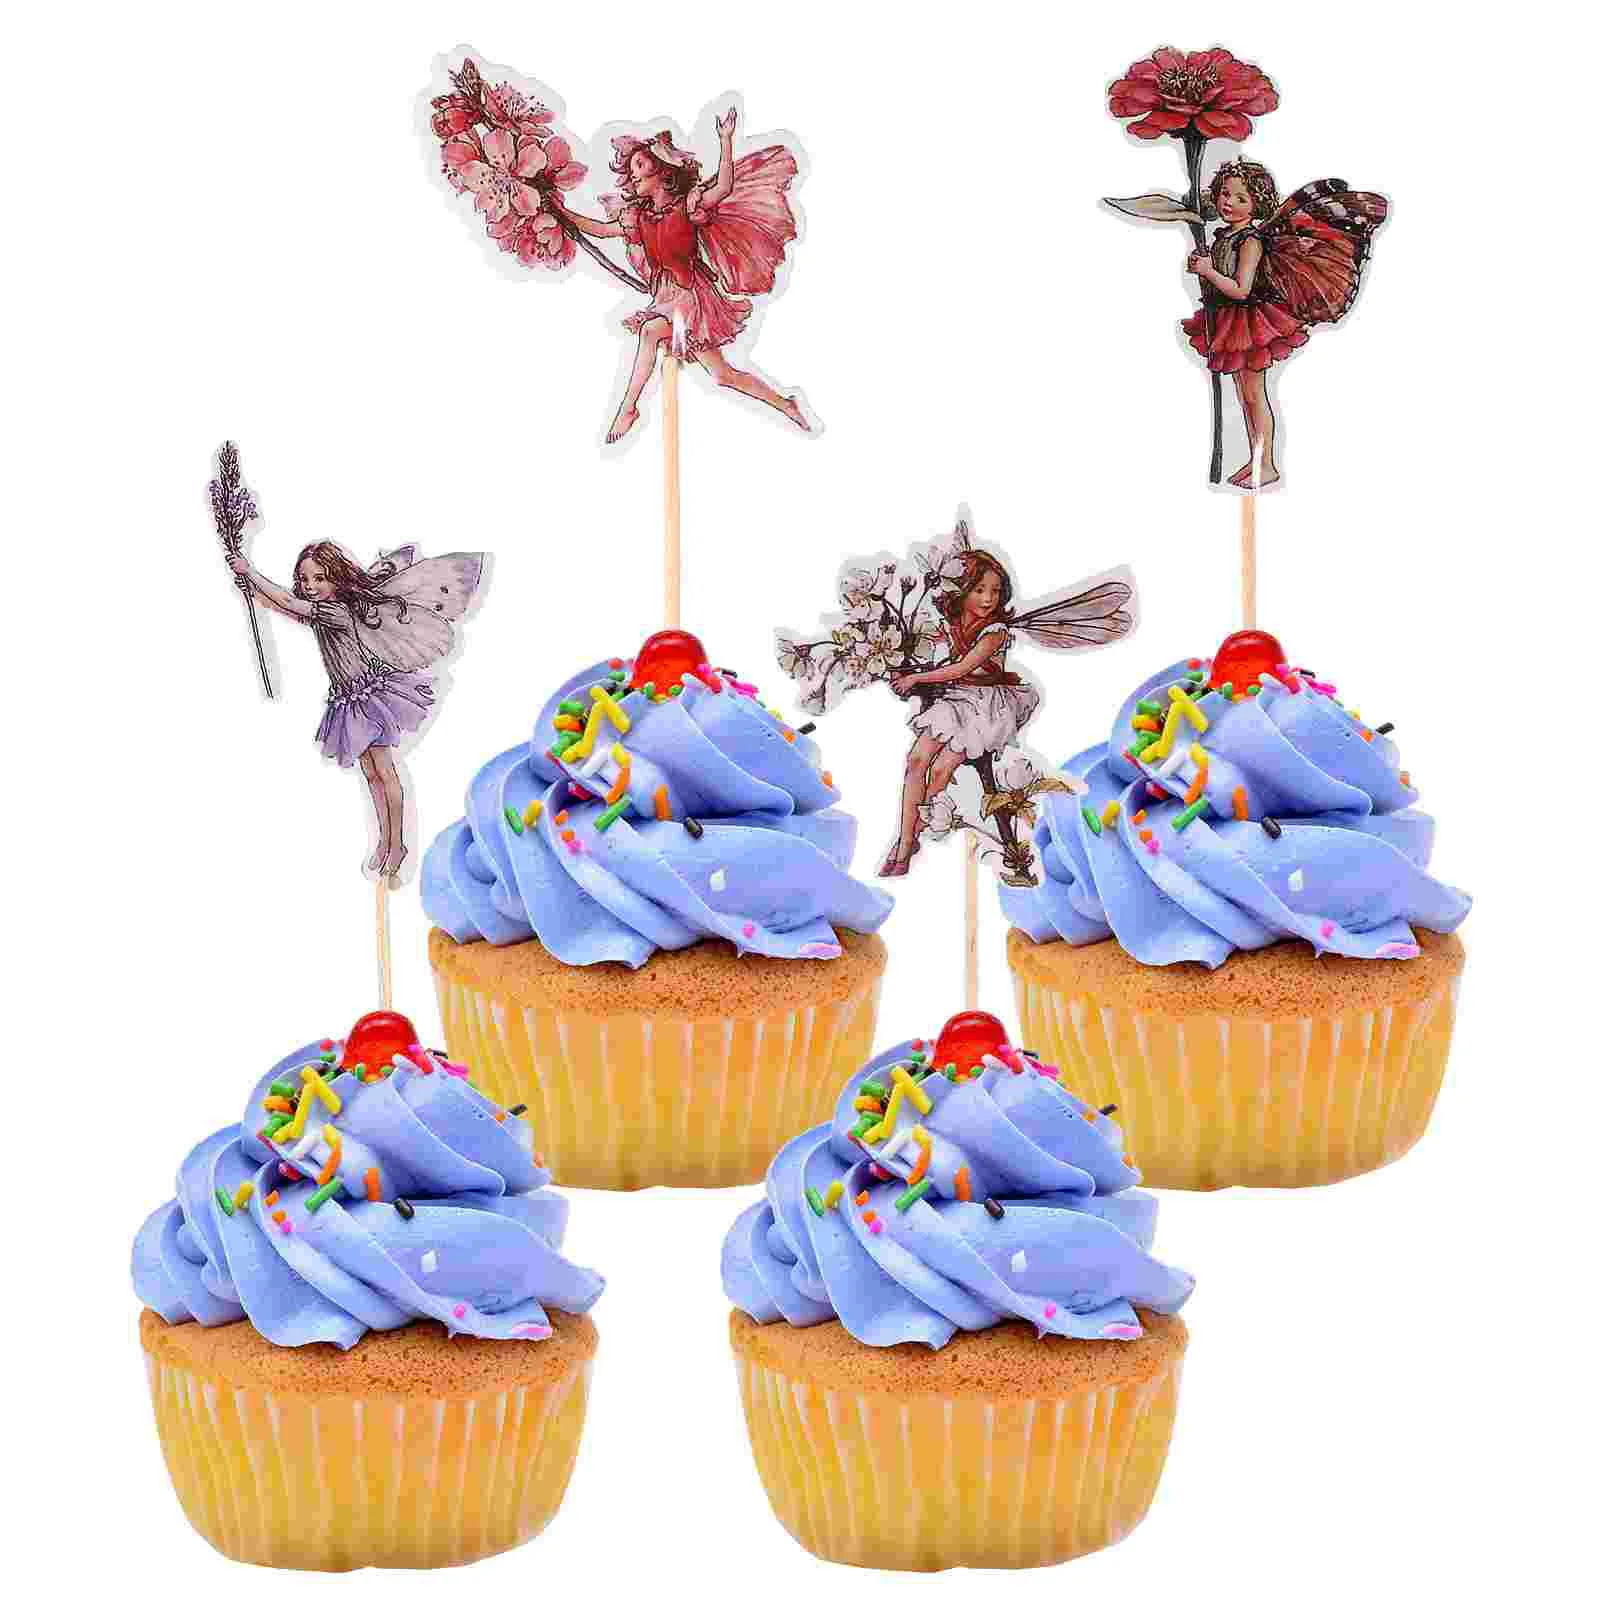 

Fairy Cupcake Topper Decorations Cake Party Birthday Flower Toppers Girlstoothpicks Picks Supplies Shower Wedding Baby Ornament